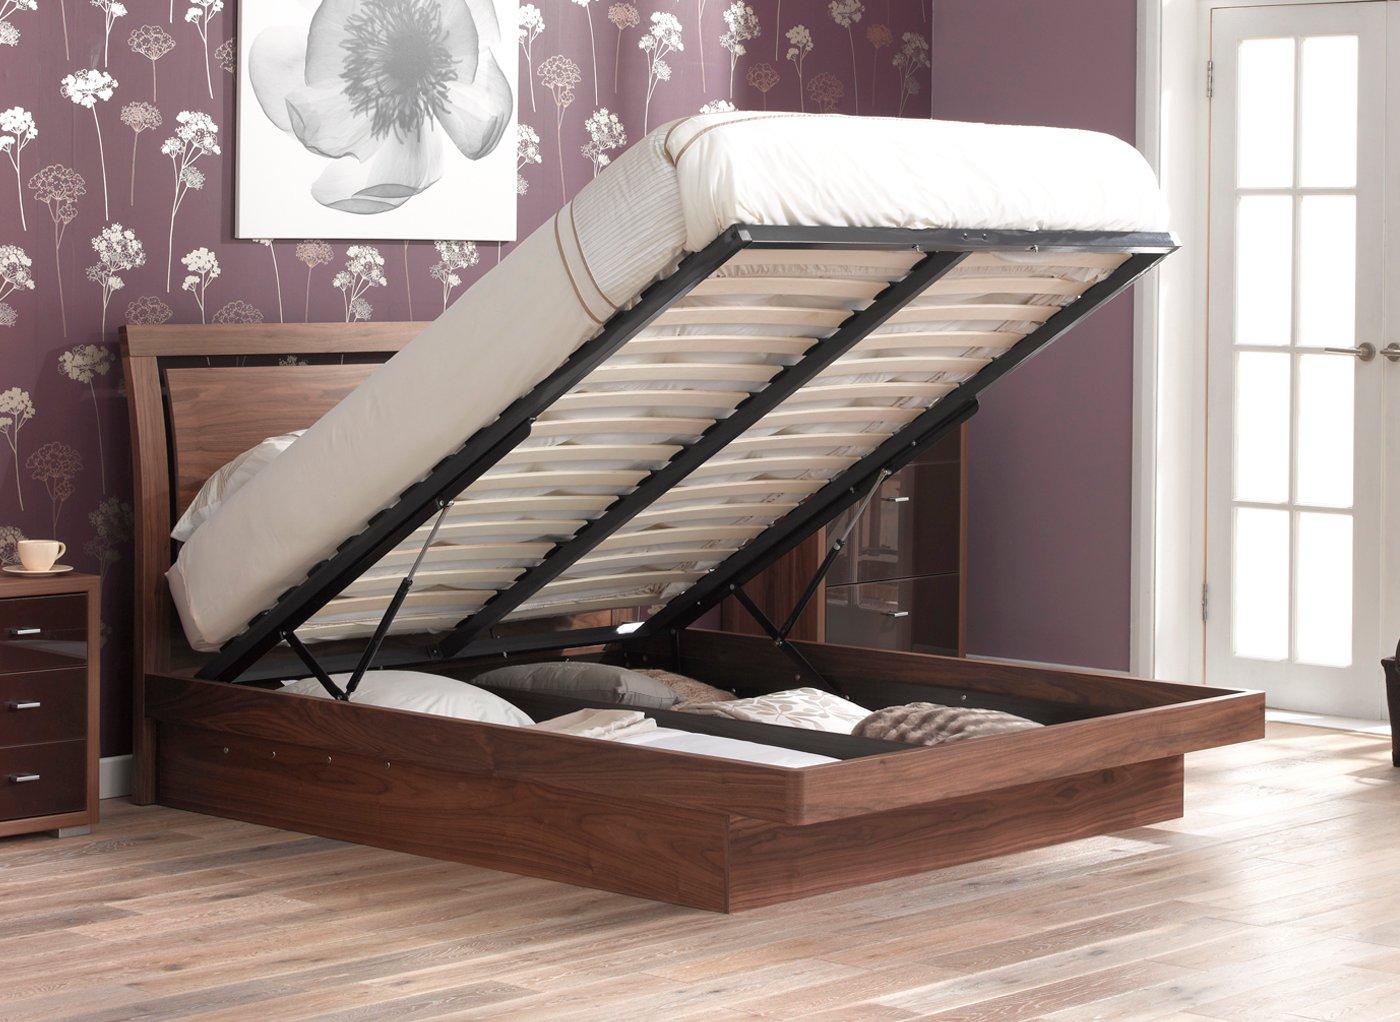 3 4 ottoman bed with mattress